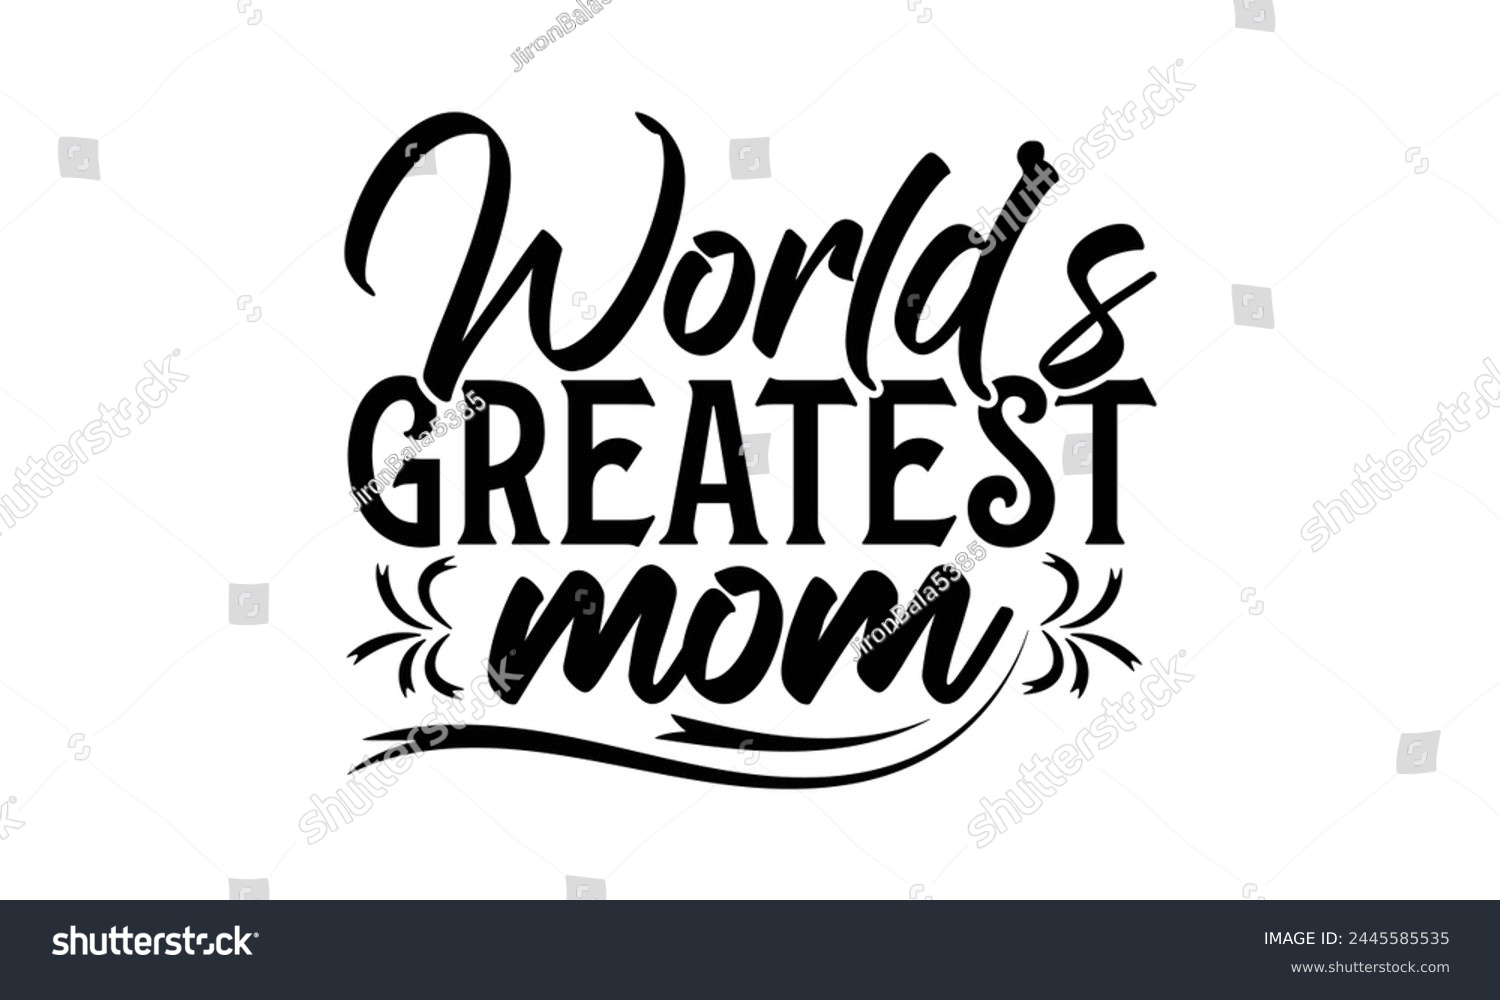 SVG of World’s greatest mom - Mom t-shirt design, isolated on white background, this illustration can be used as a print on t-shirts and bags, cover book, template, stationary or as a poster. svg